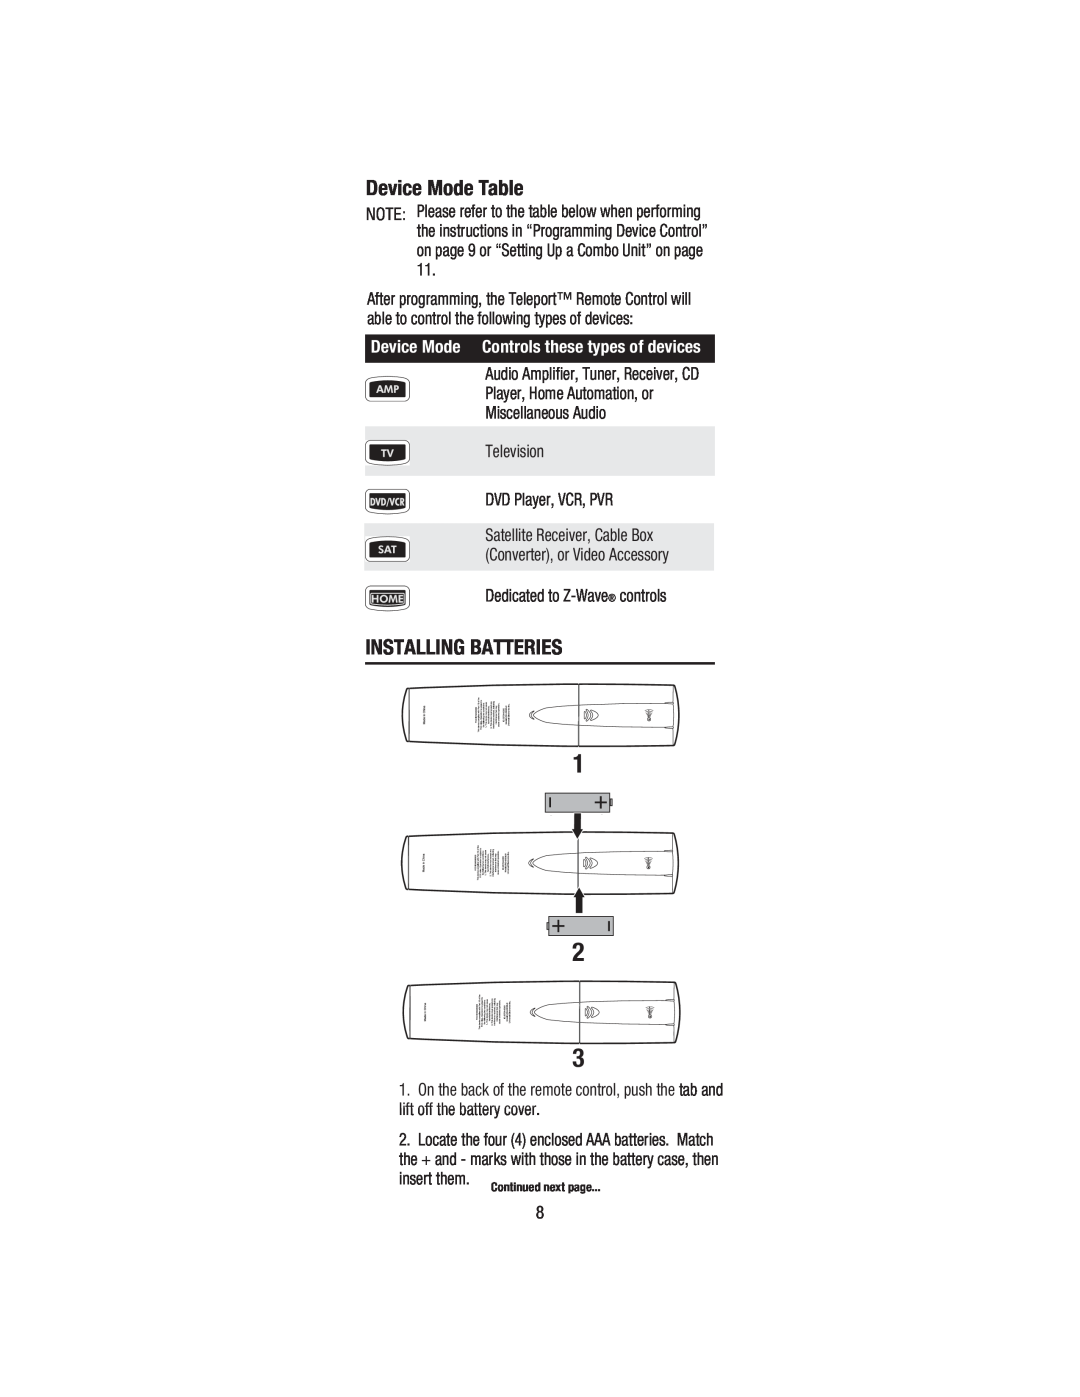 Wayne-Dalton WDHC-20 user manual Device Mode Table, Installing Batteries, Device Mode Controls these types of devices 